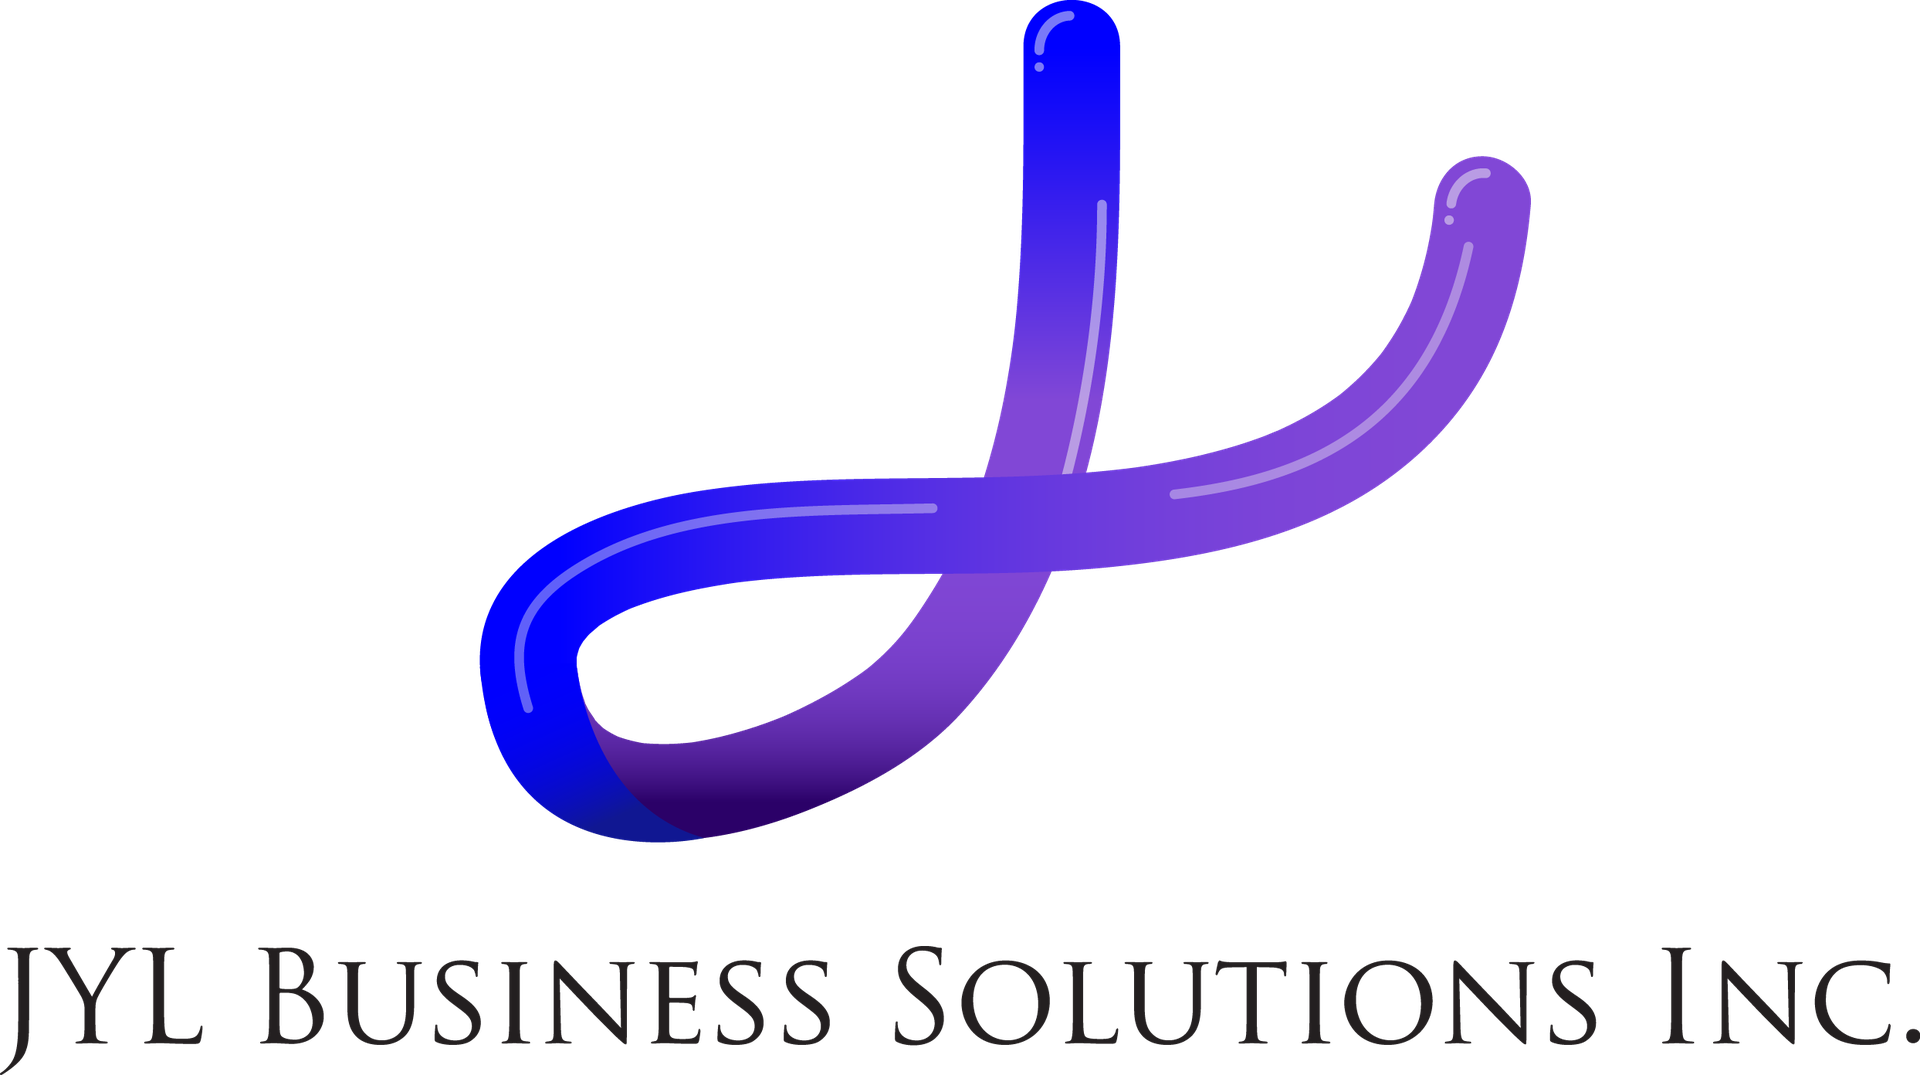 JYL Business Solutions, Inc.